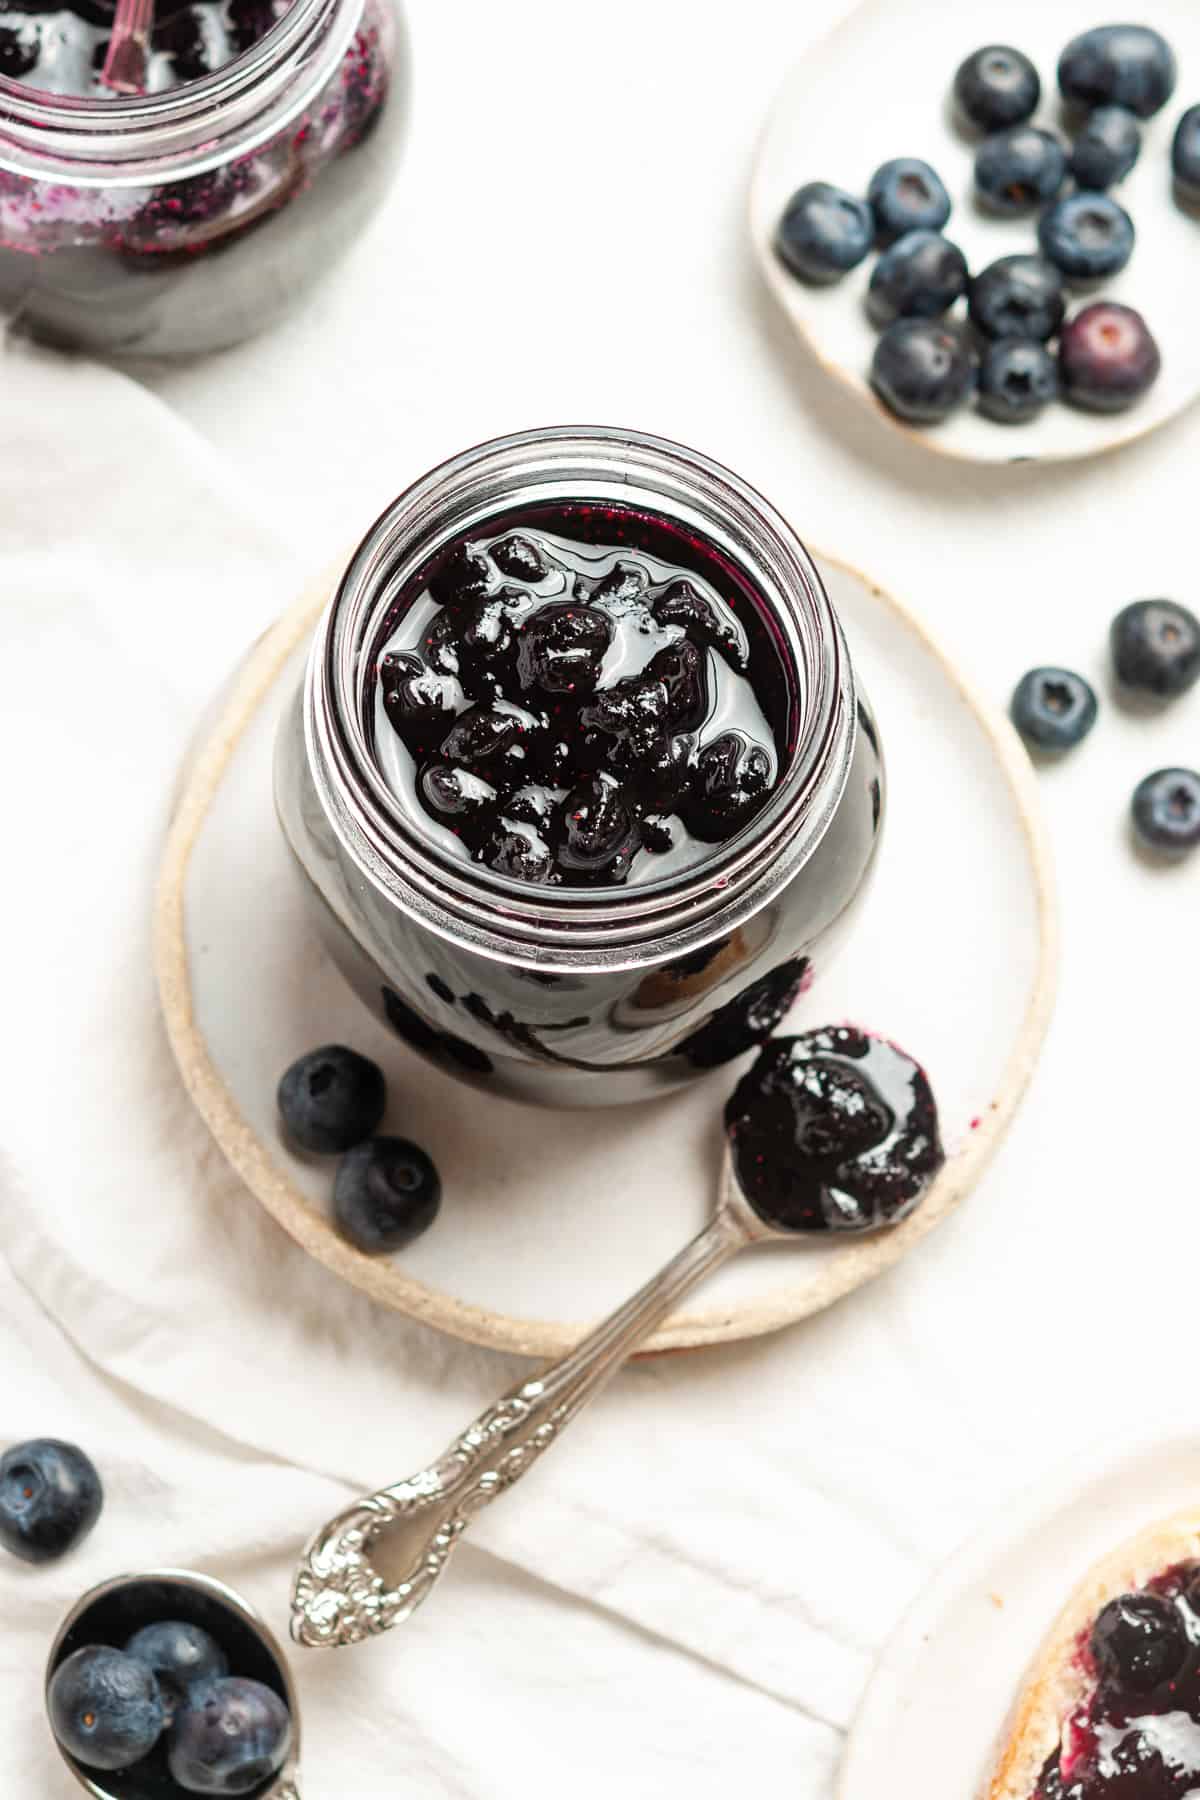 Overhead shot of open jar of jam, sitting on a plate, with a spoon and some blueberries on the edge.